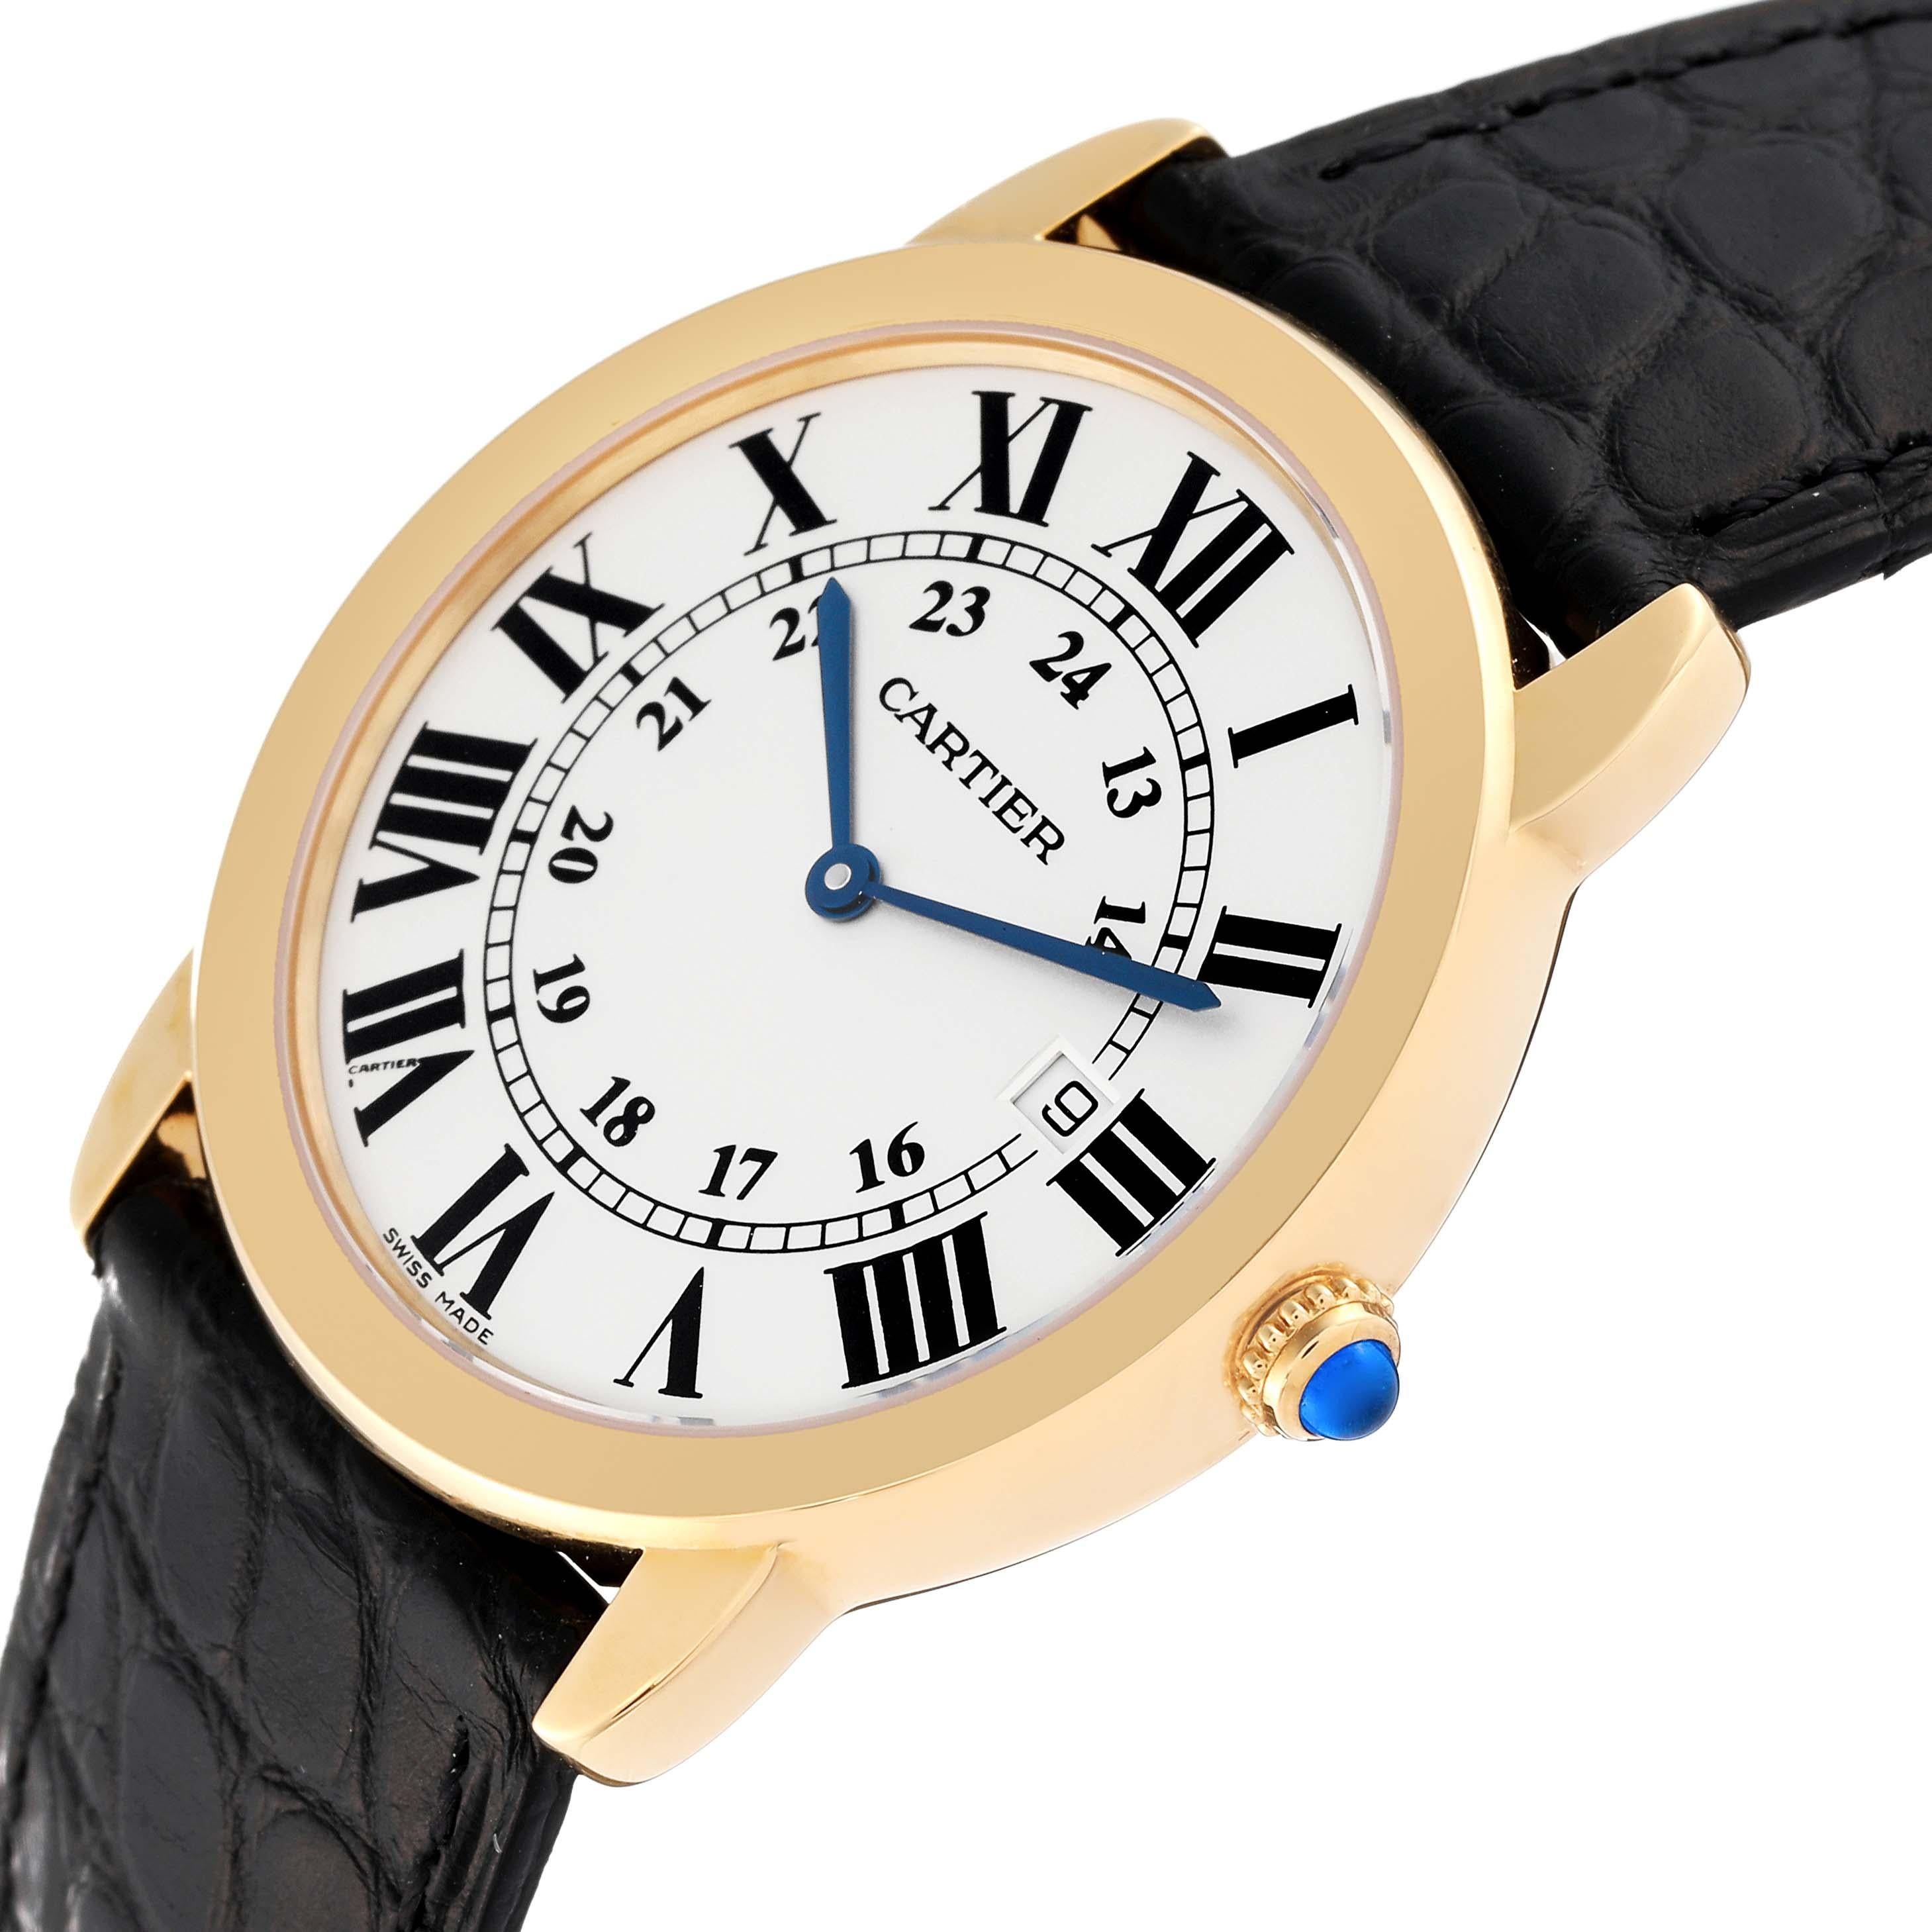 Cartier Ronde Solo 36mm Large Yellow Gold Steel Mens Watch W6700455 Unworn. Quartz movement. 18K yellow gold and stainless steel case 36.0 mm in diameter. Circular grained crown set with a blue spinel cabochon. . Scratch resistant sapphire crystal.